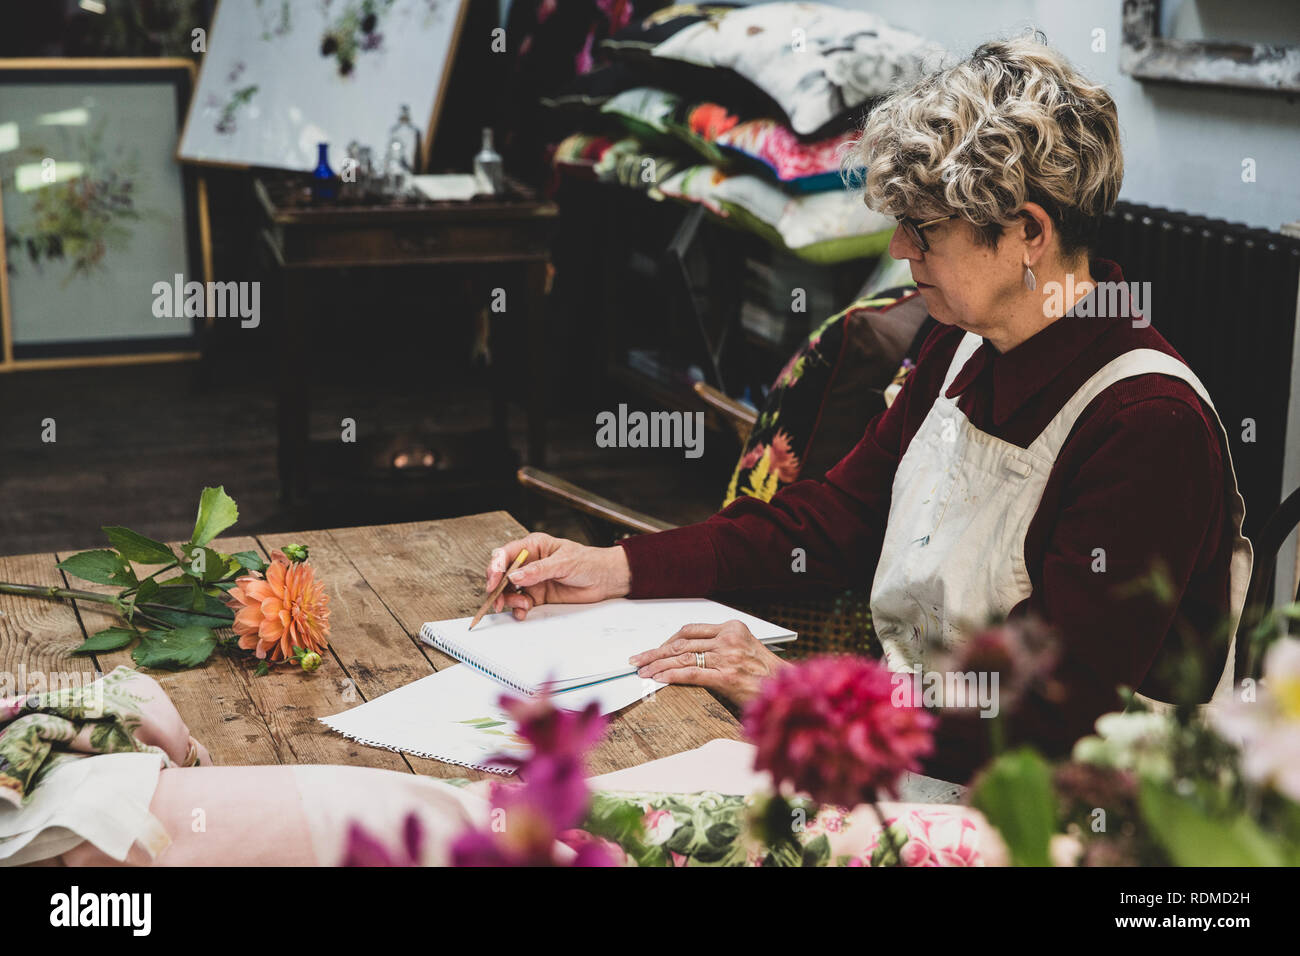 Senior woman wearing glasses, red dress and white apron sitting at table, working on pencil drawing of orange Dahlia. Stock Photo